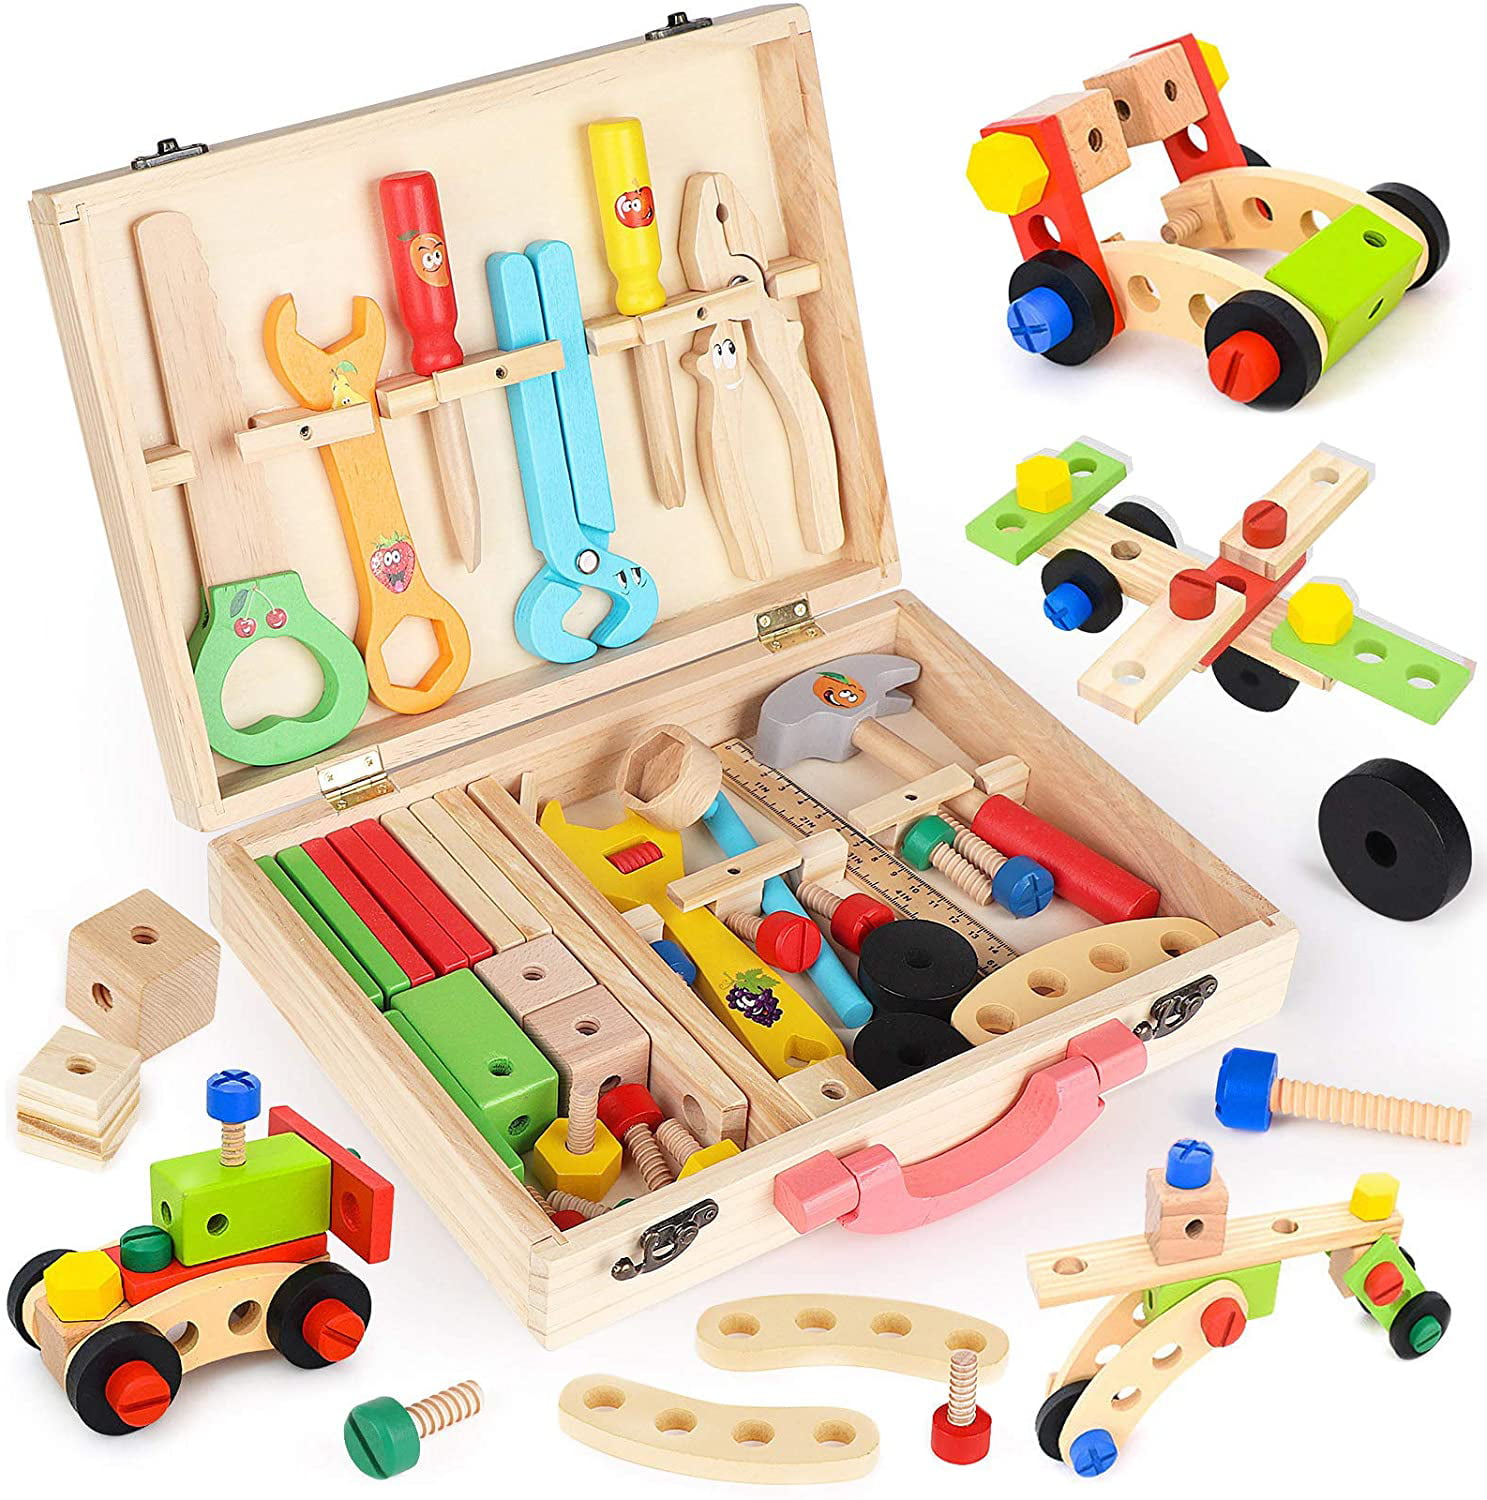 120pc Wooden Construction Building DIY Nuts & Bolts Tool Kit Toy Kid Builder Set